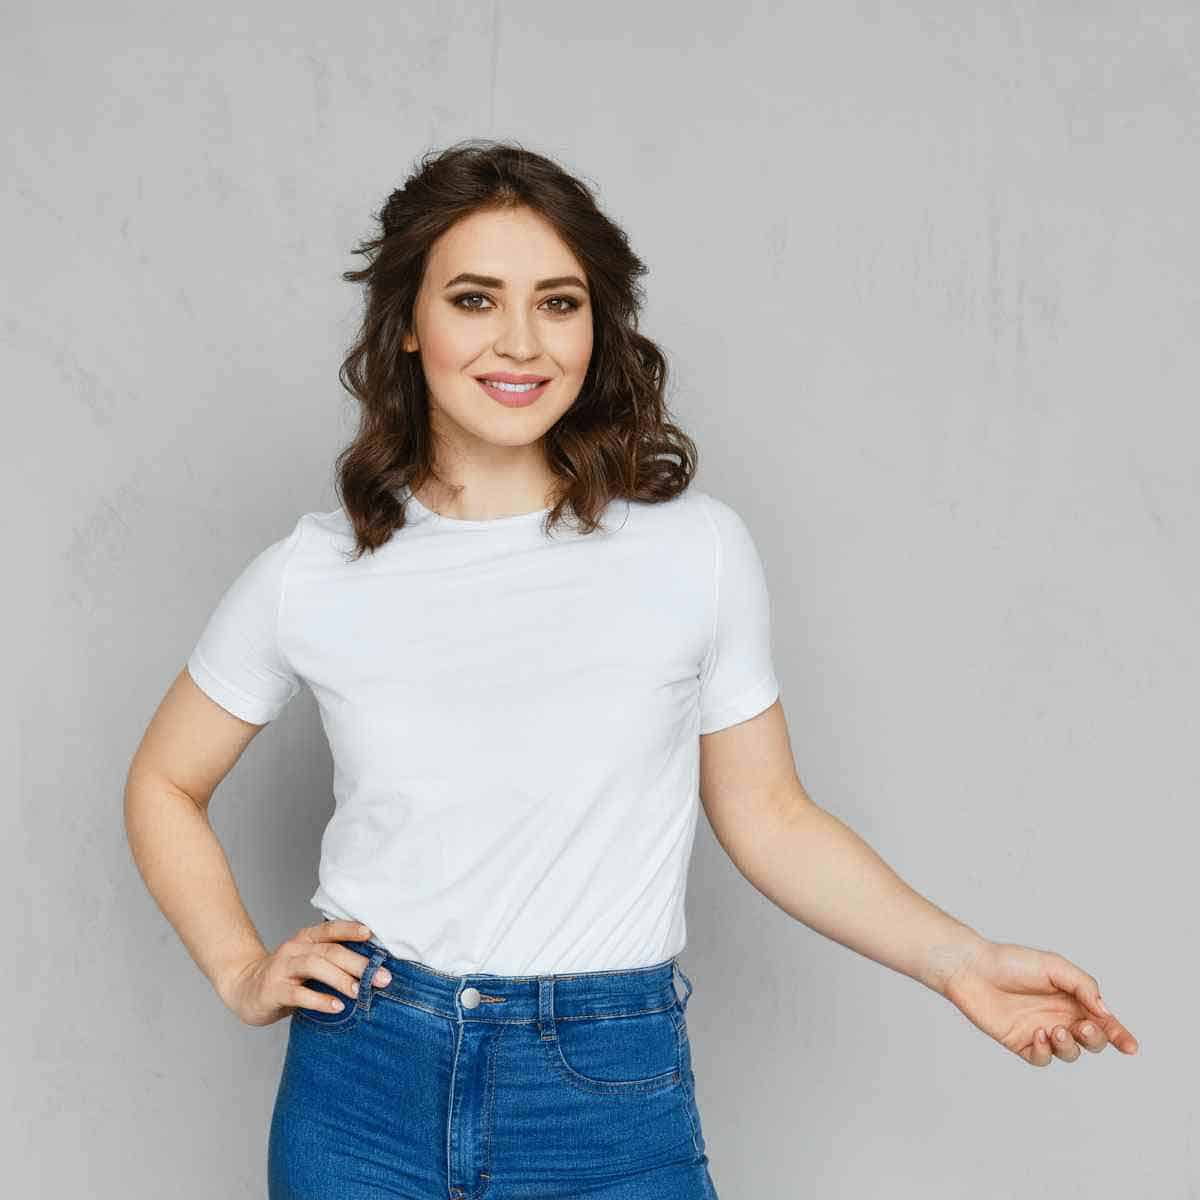 A young woman in a classic white t-shirt and blue jeans.